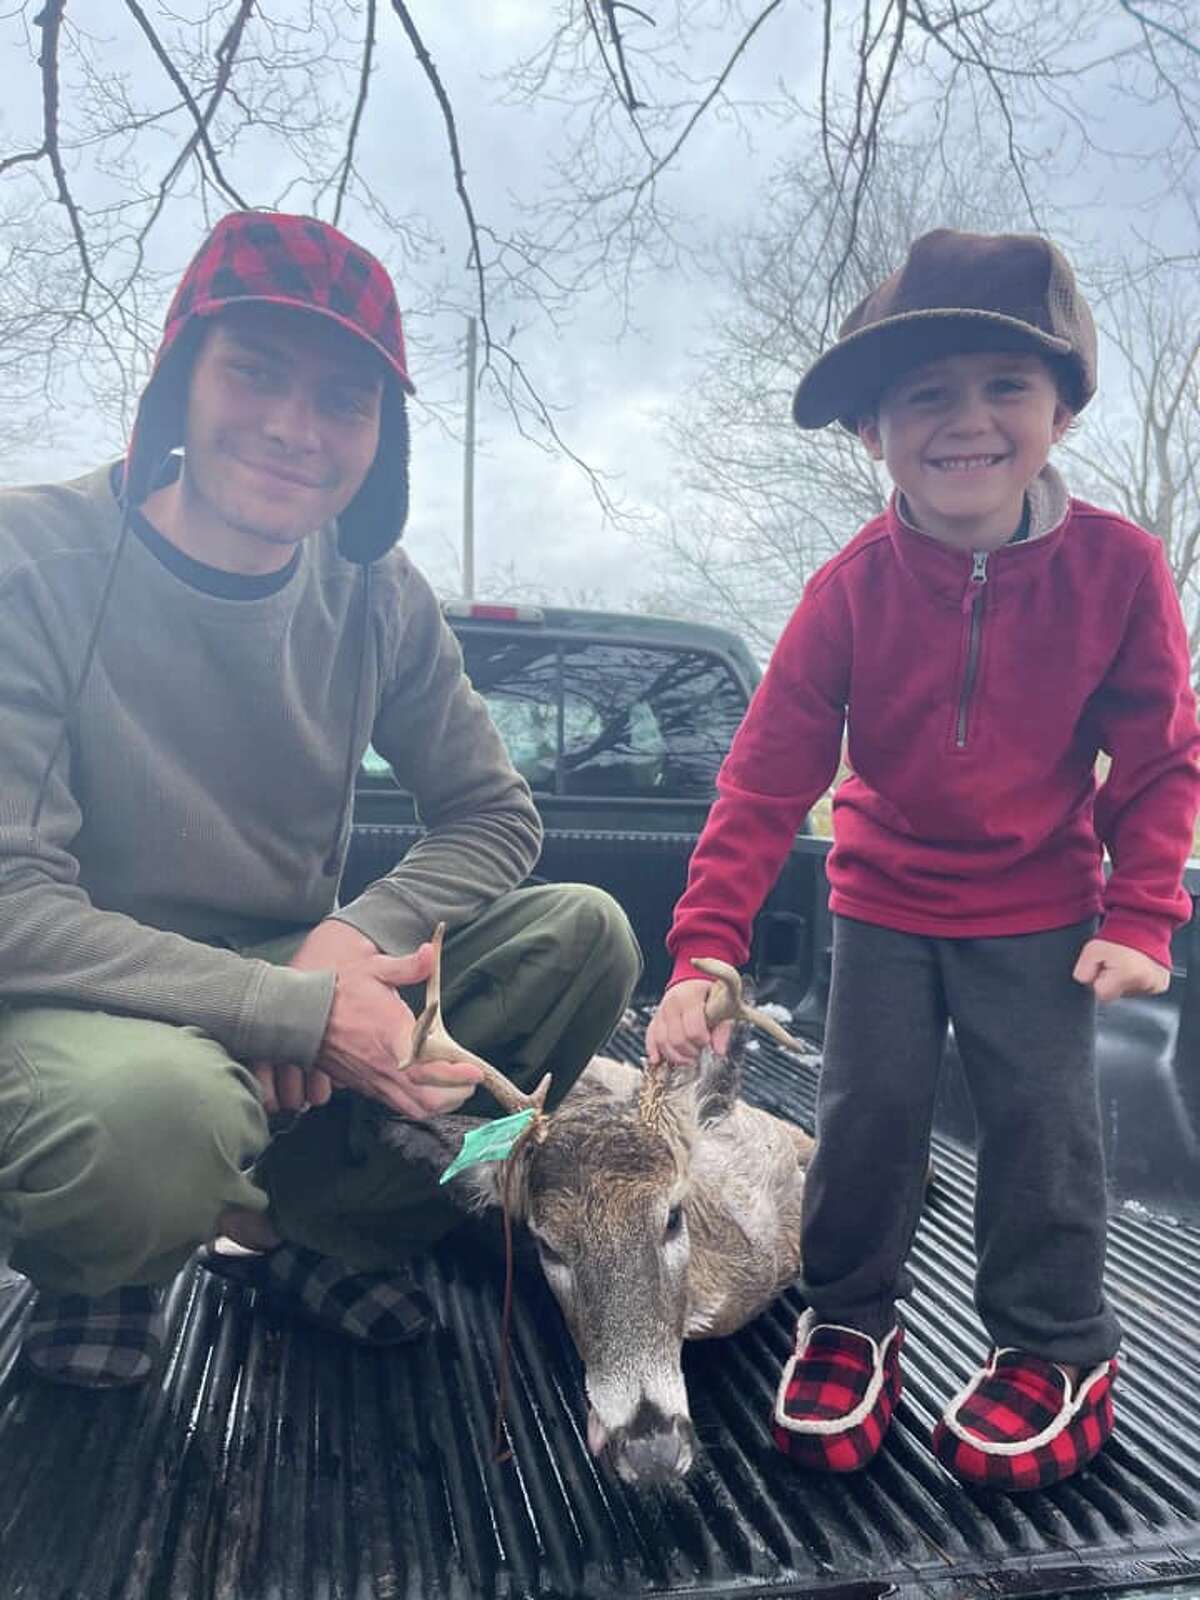 "Opening day: My son Kevin told his dad he wanted to see a buck yesterday morning. Well dad delivered and the smile says it all!!!!!! Food in the freezer for this 7pt.